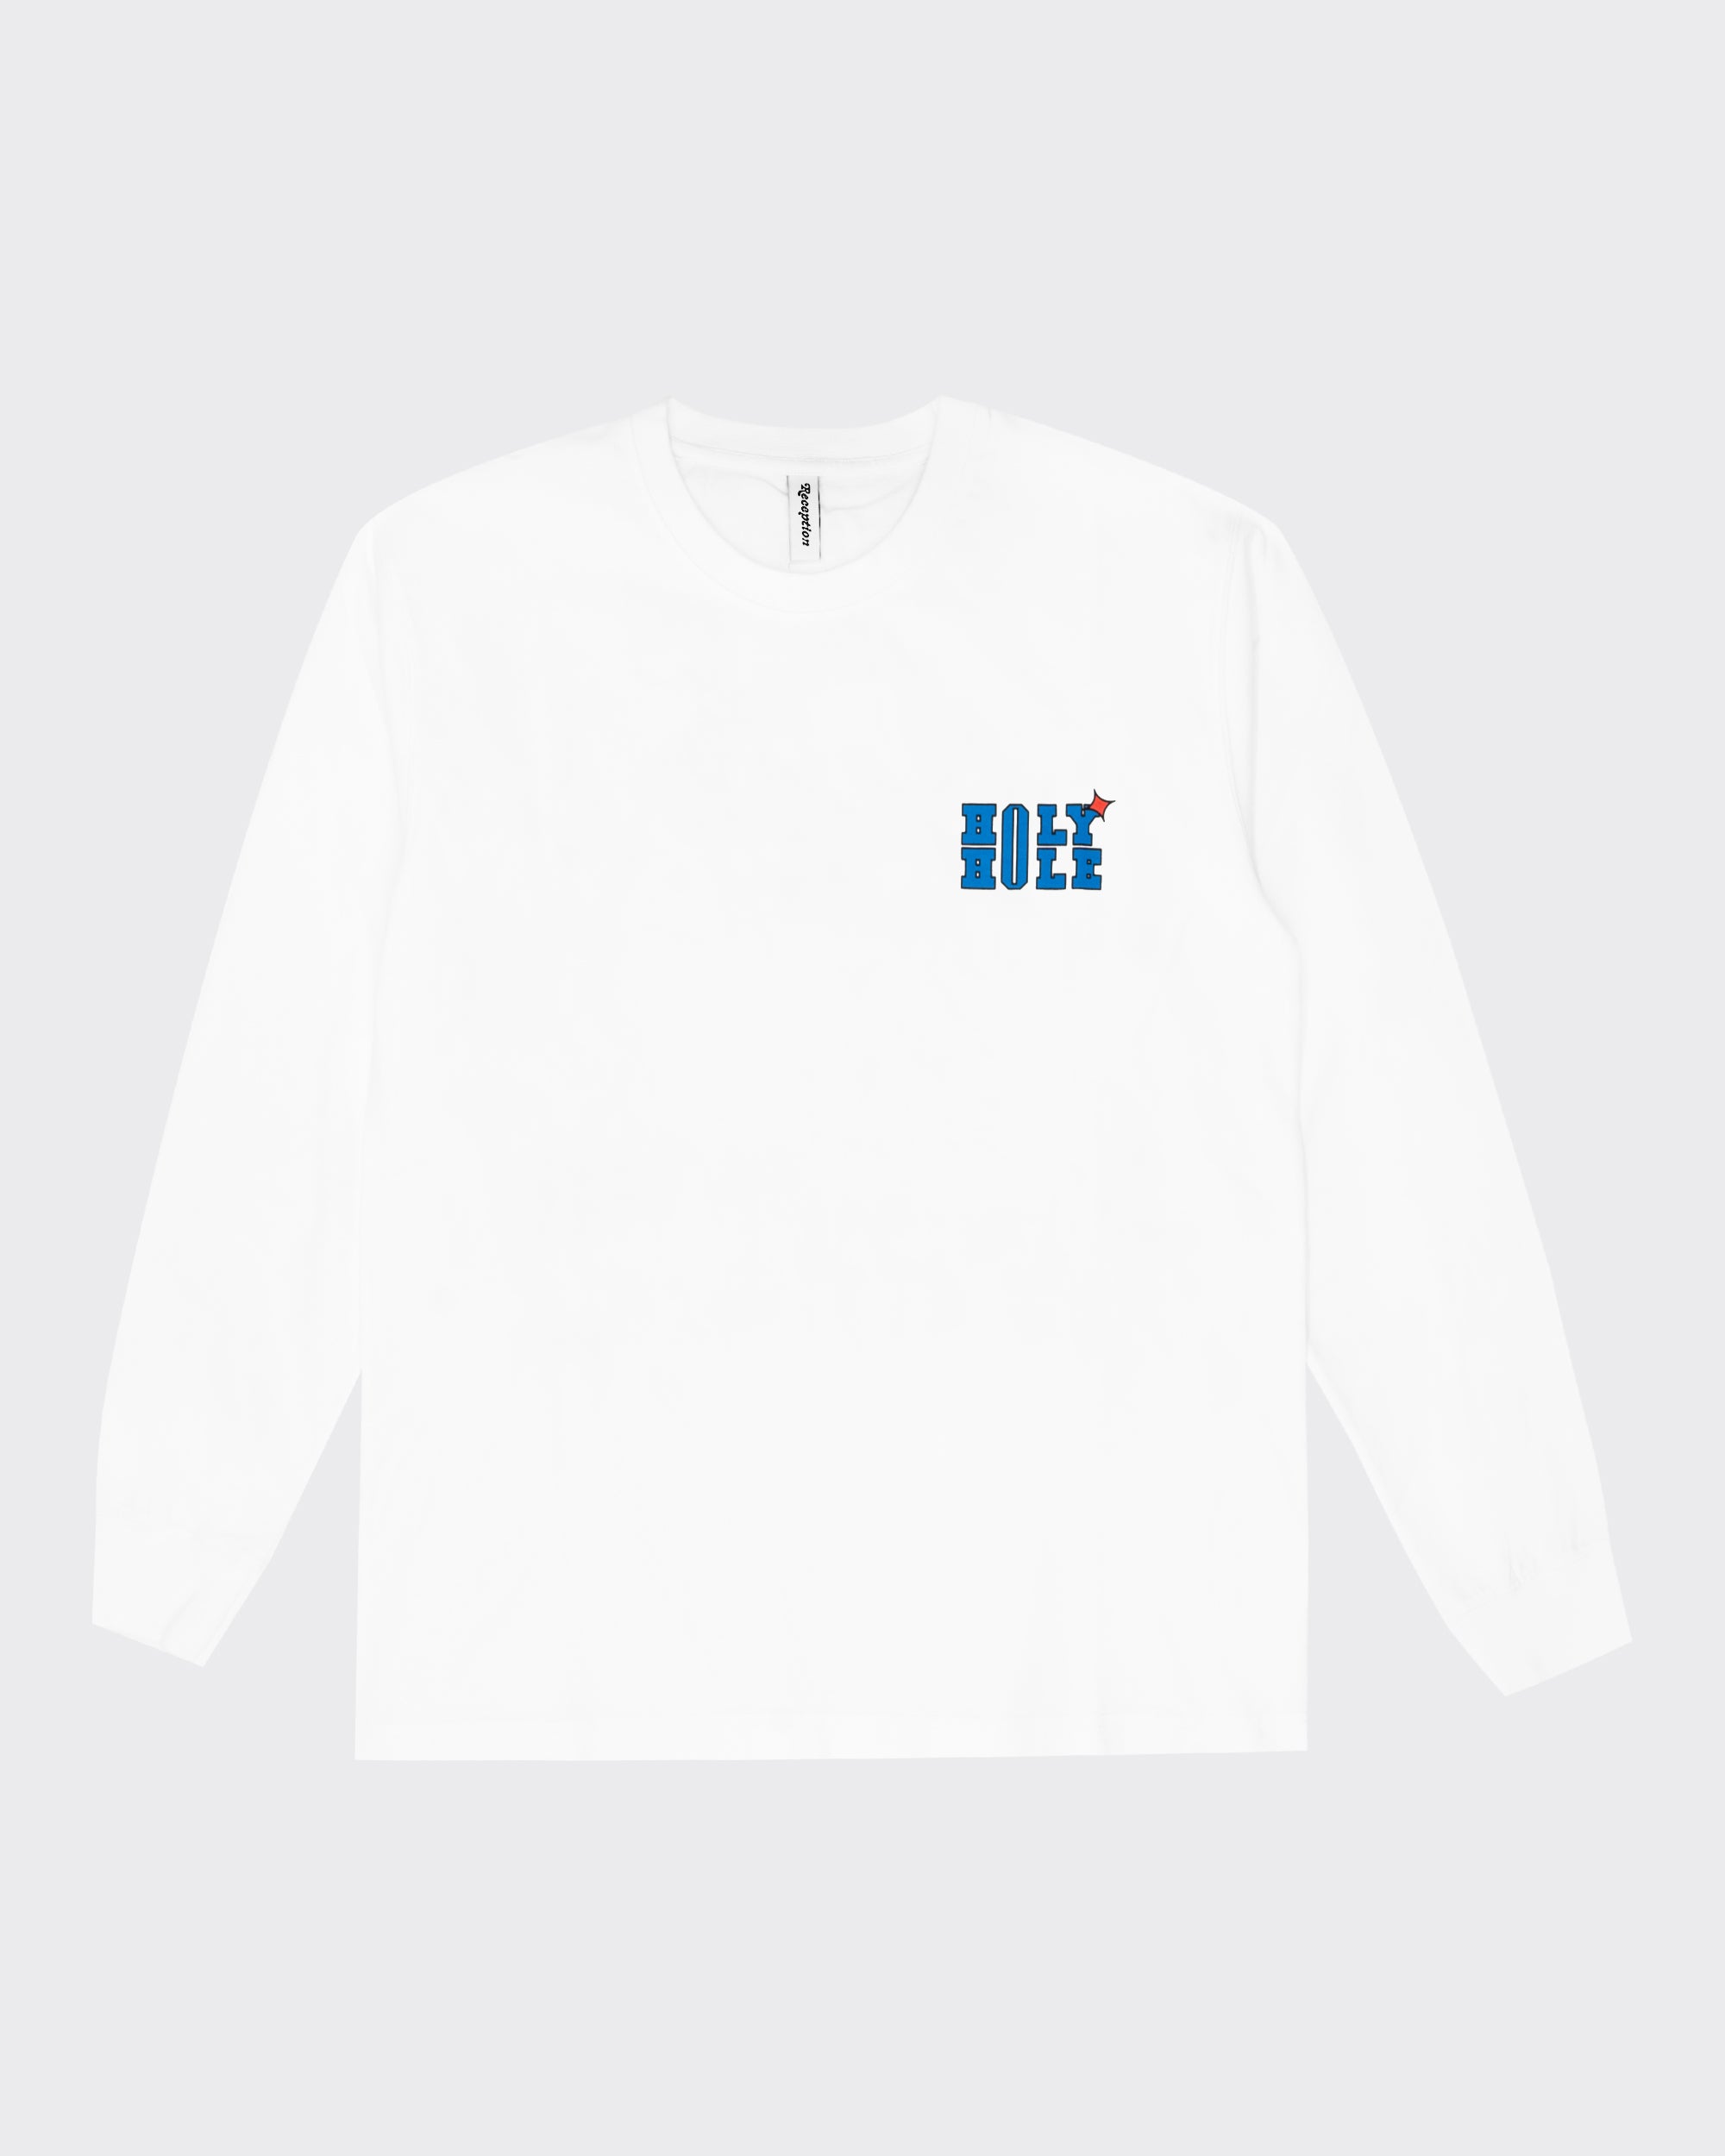 Reception - Tee - Holy - LS Tee - White